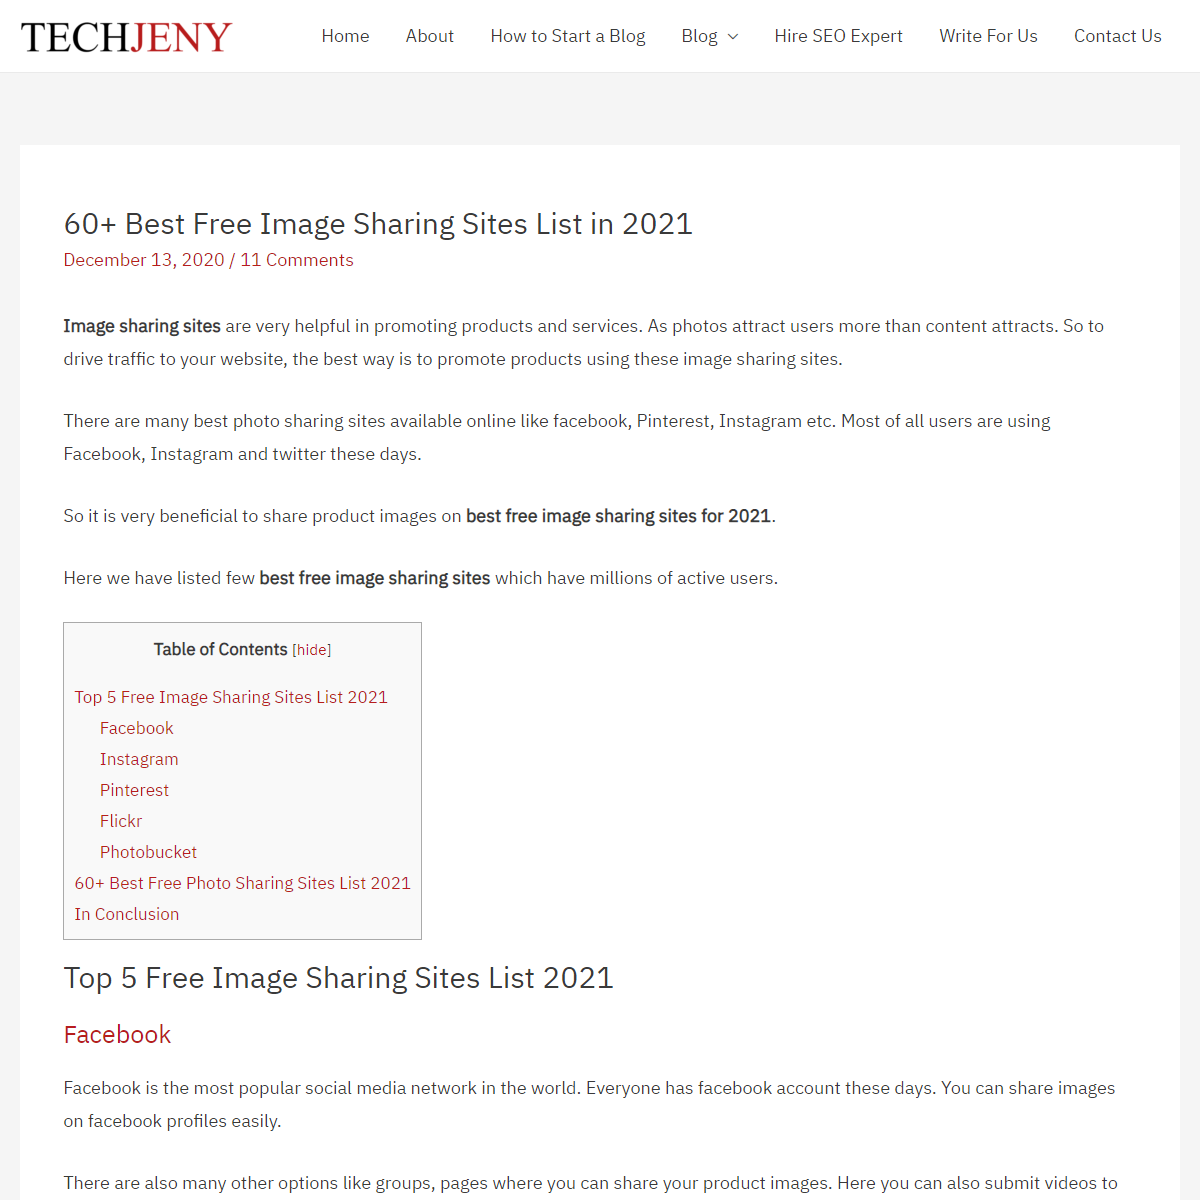 A complete backup of https://www.techjeny.org/best-photo-sharing-sites-list/